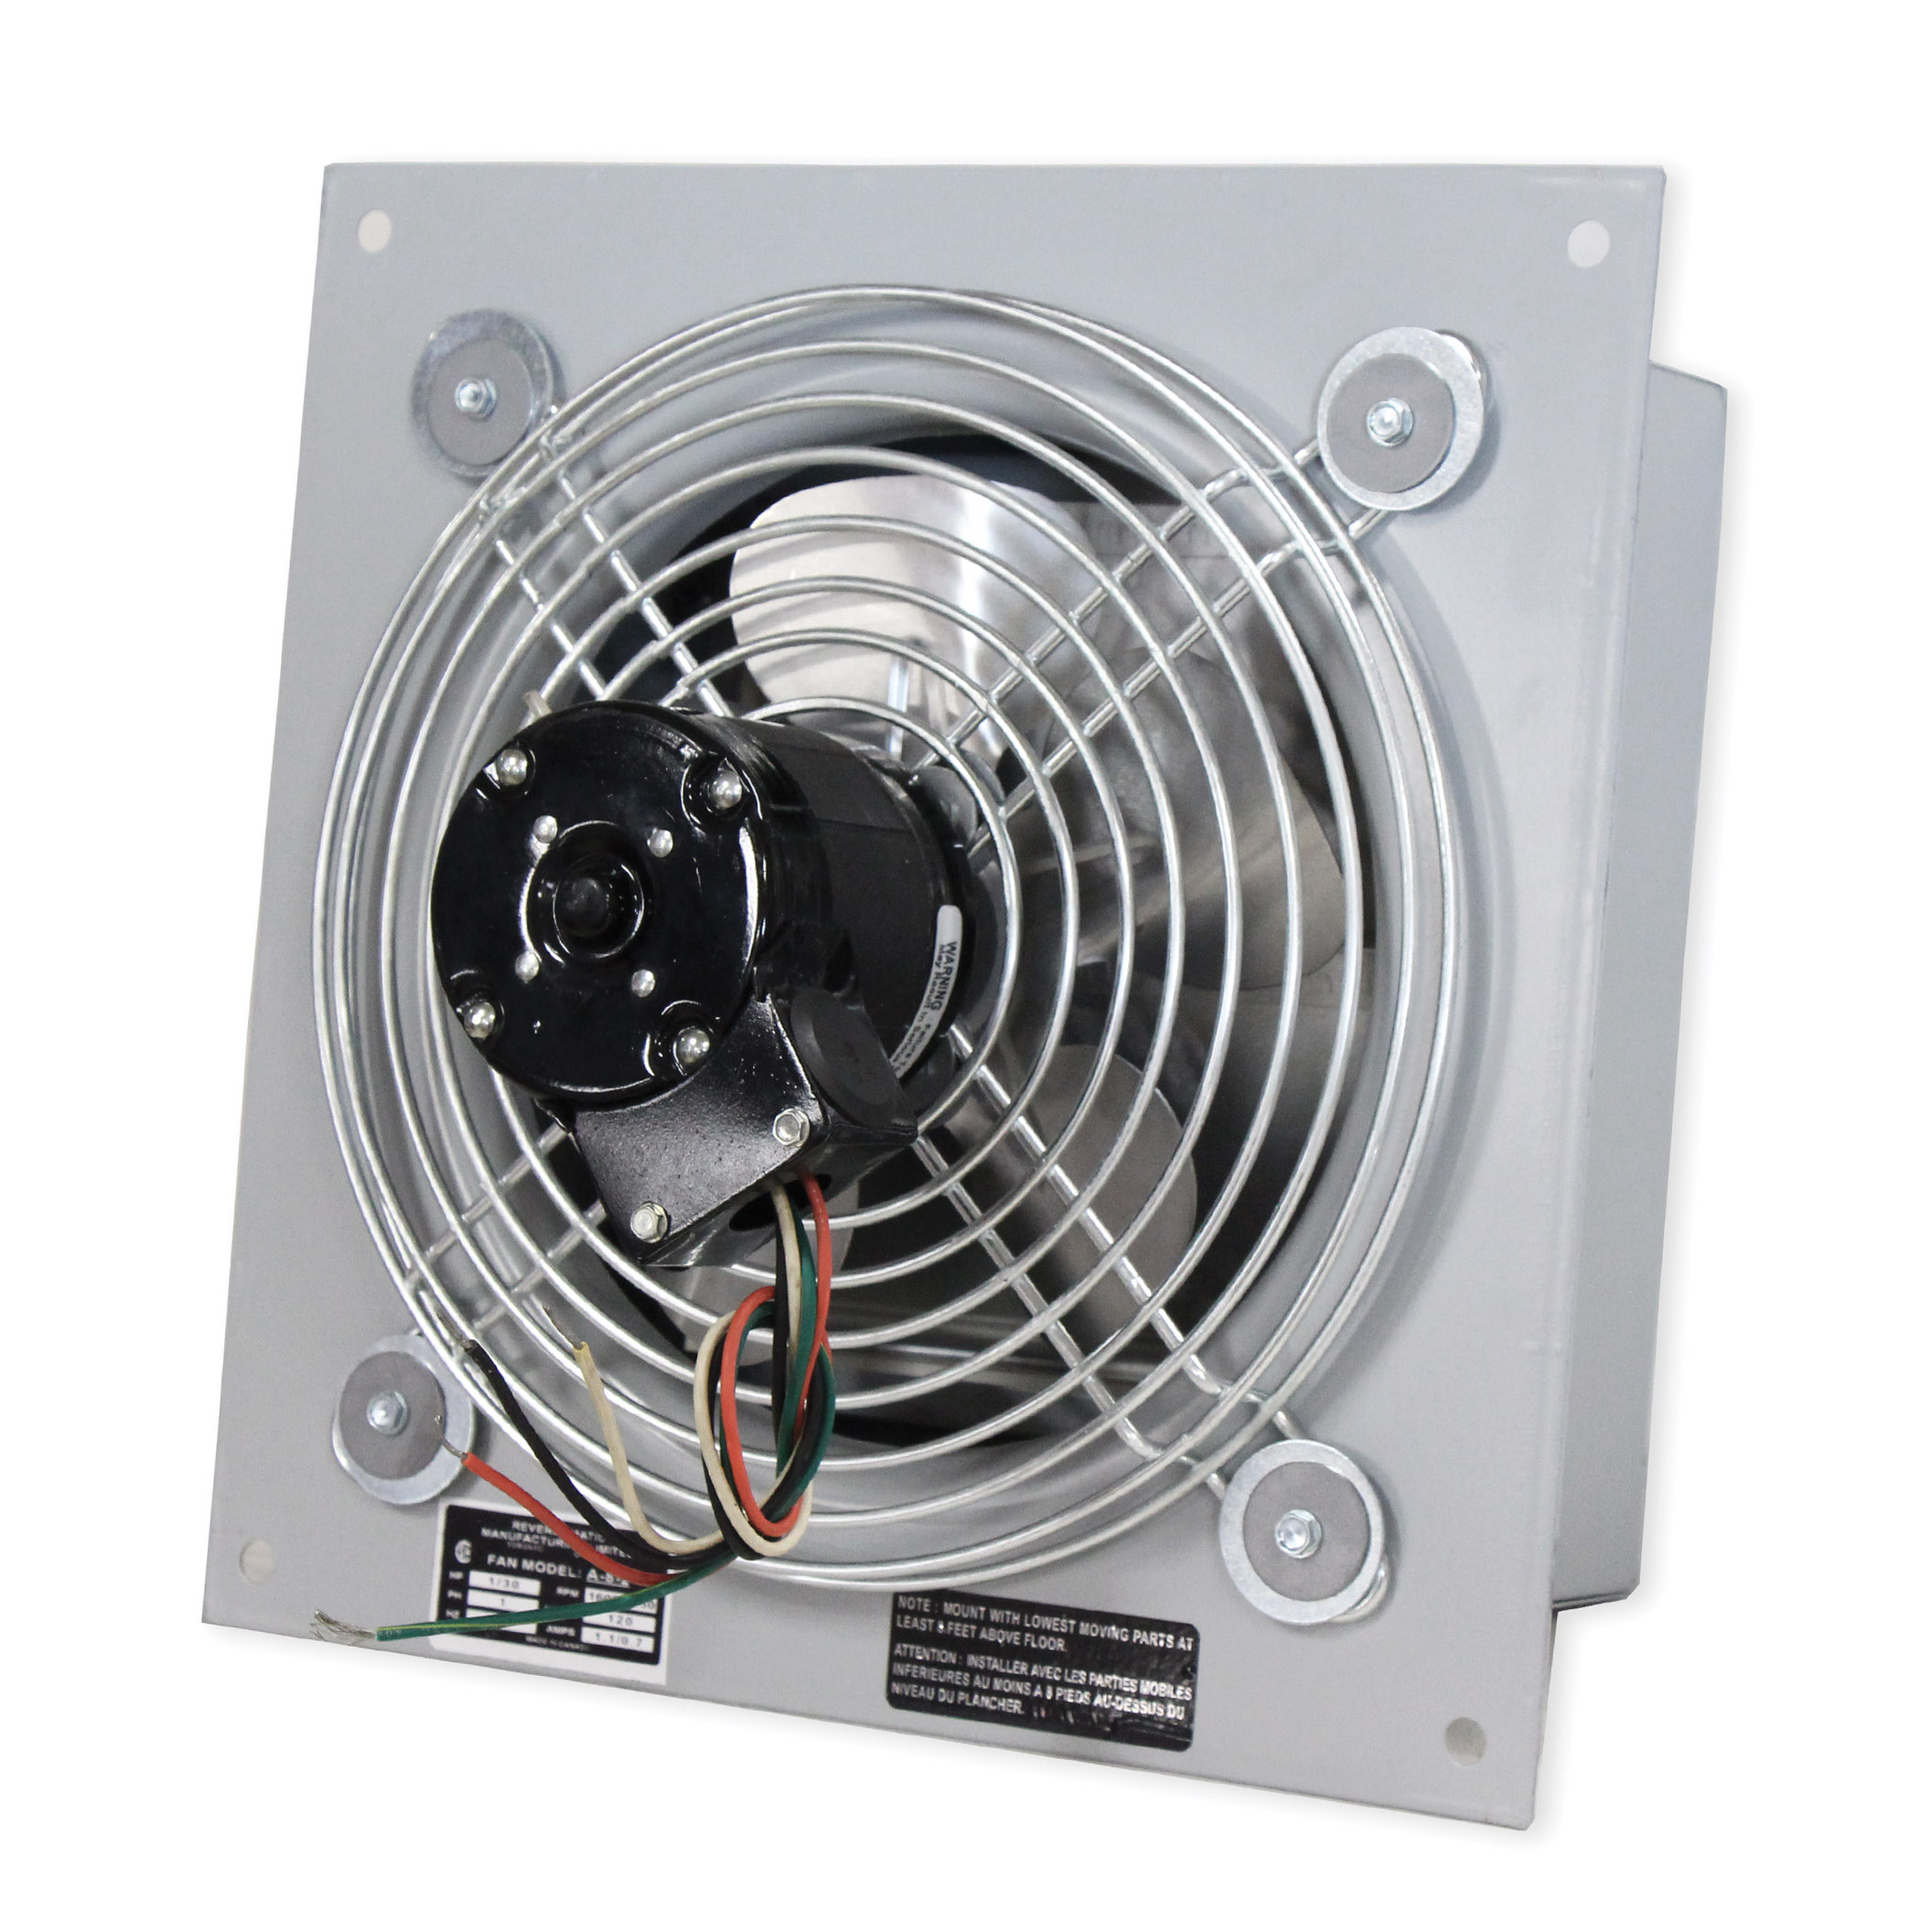 Reversomatic A Series 8 Direct Drive Wall Exhaust Fan A8 2 intended for dimensions 2112 X 2112